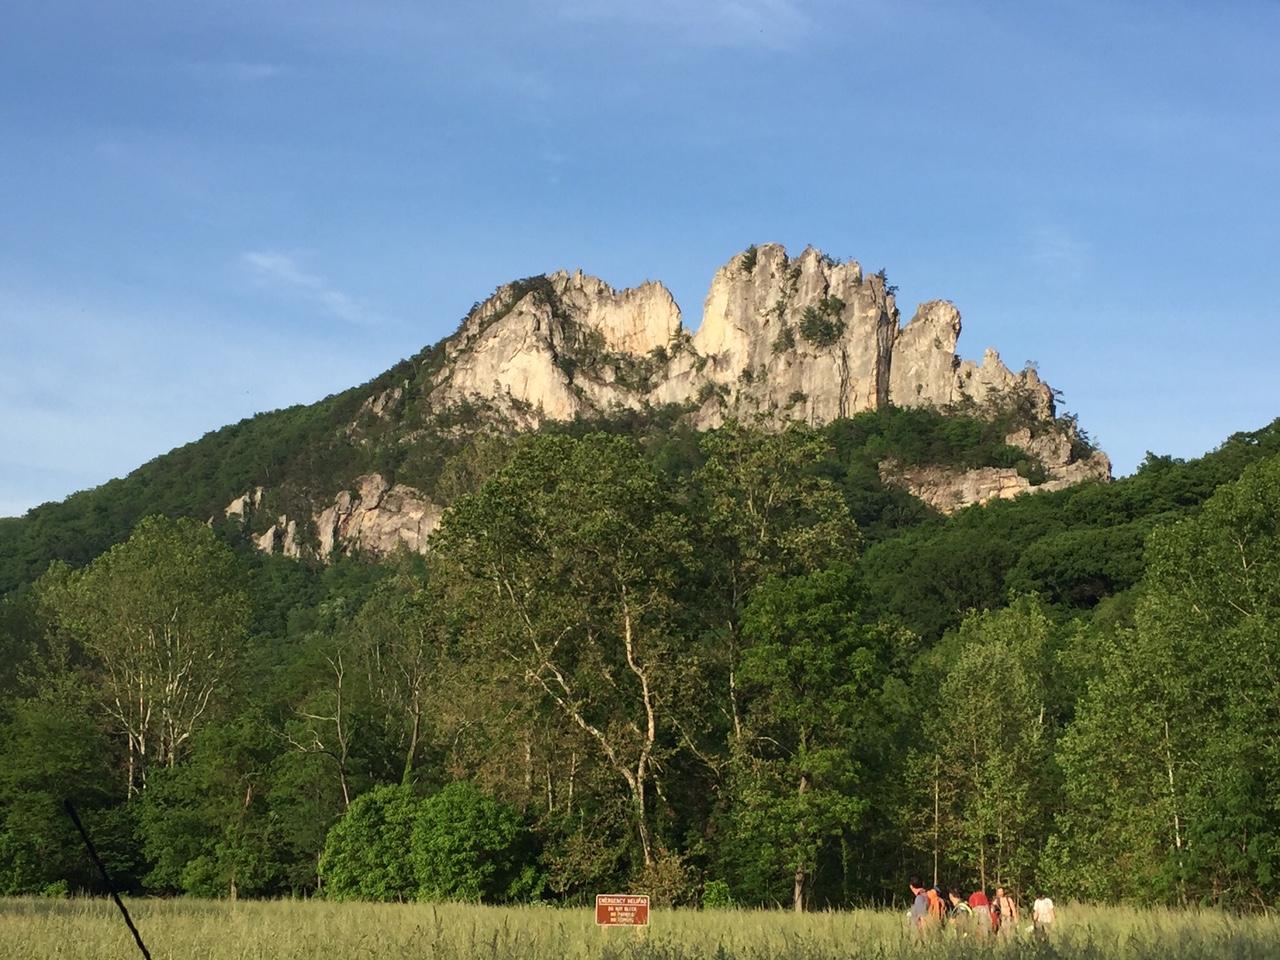 Seneca Rocks is a large crag and local landmark in Pendleton County in the Eastern Panhandle of West Virginia